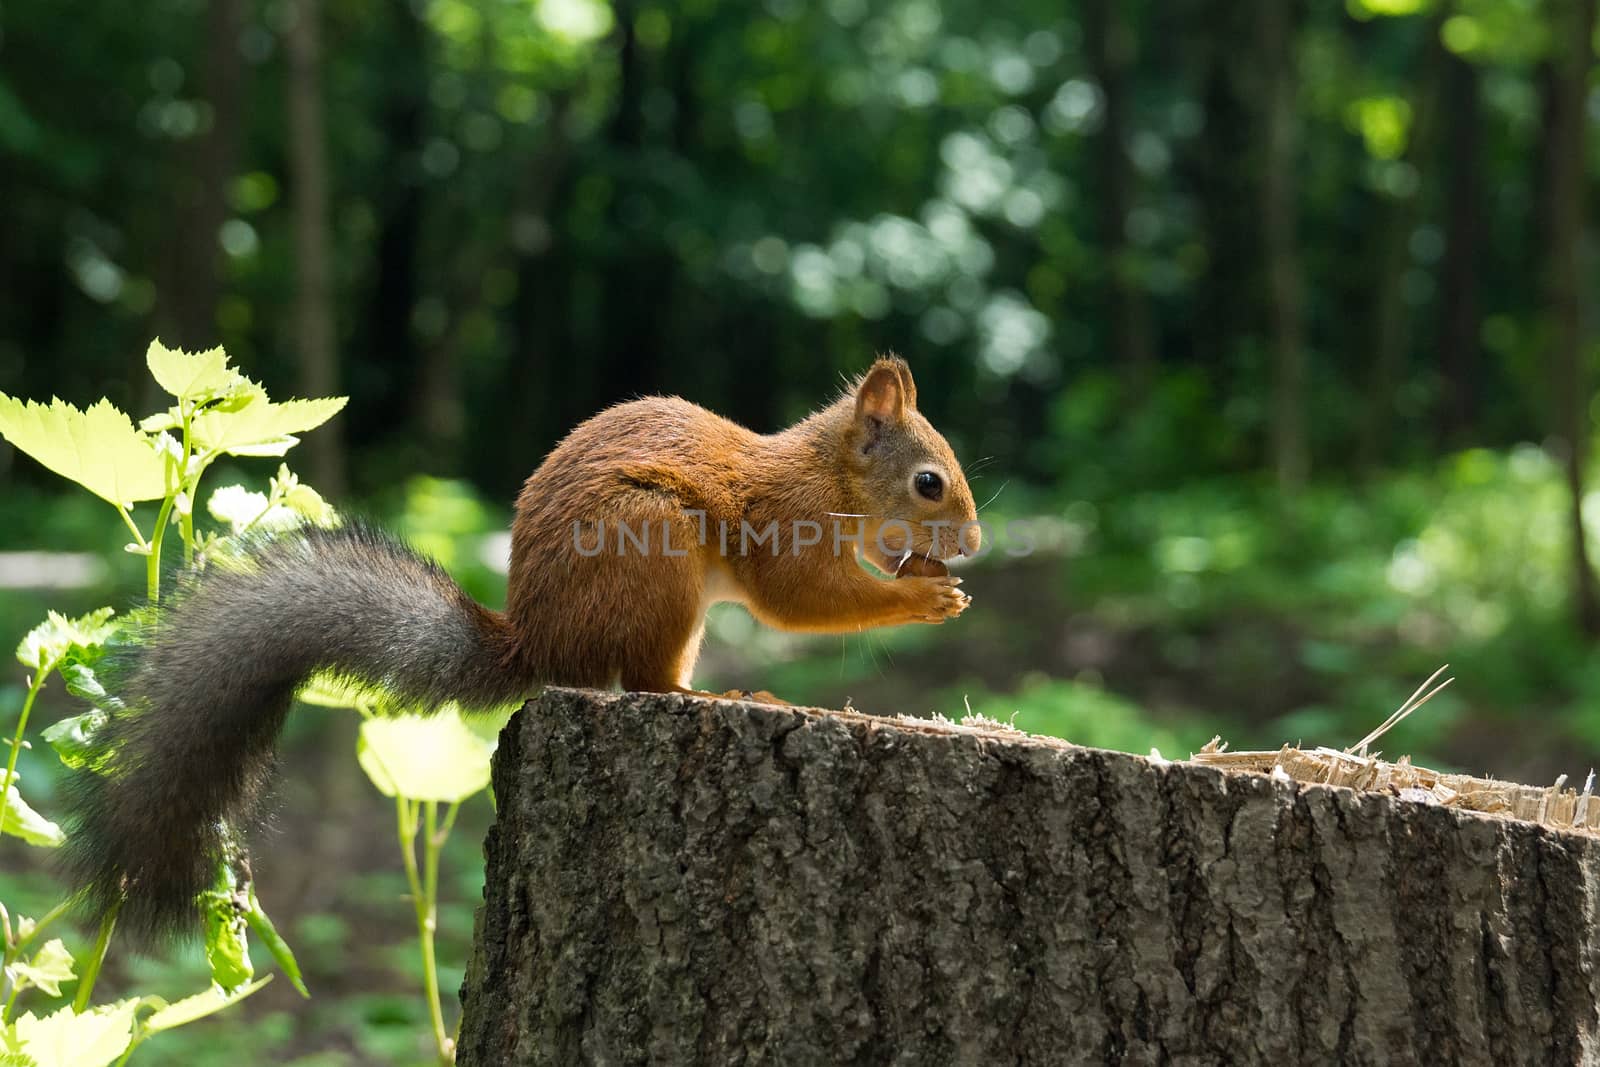 Squirrel on a hemp with a nut, Russia, Moscow, park summer